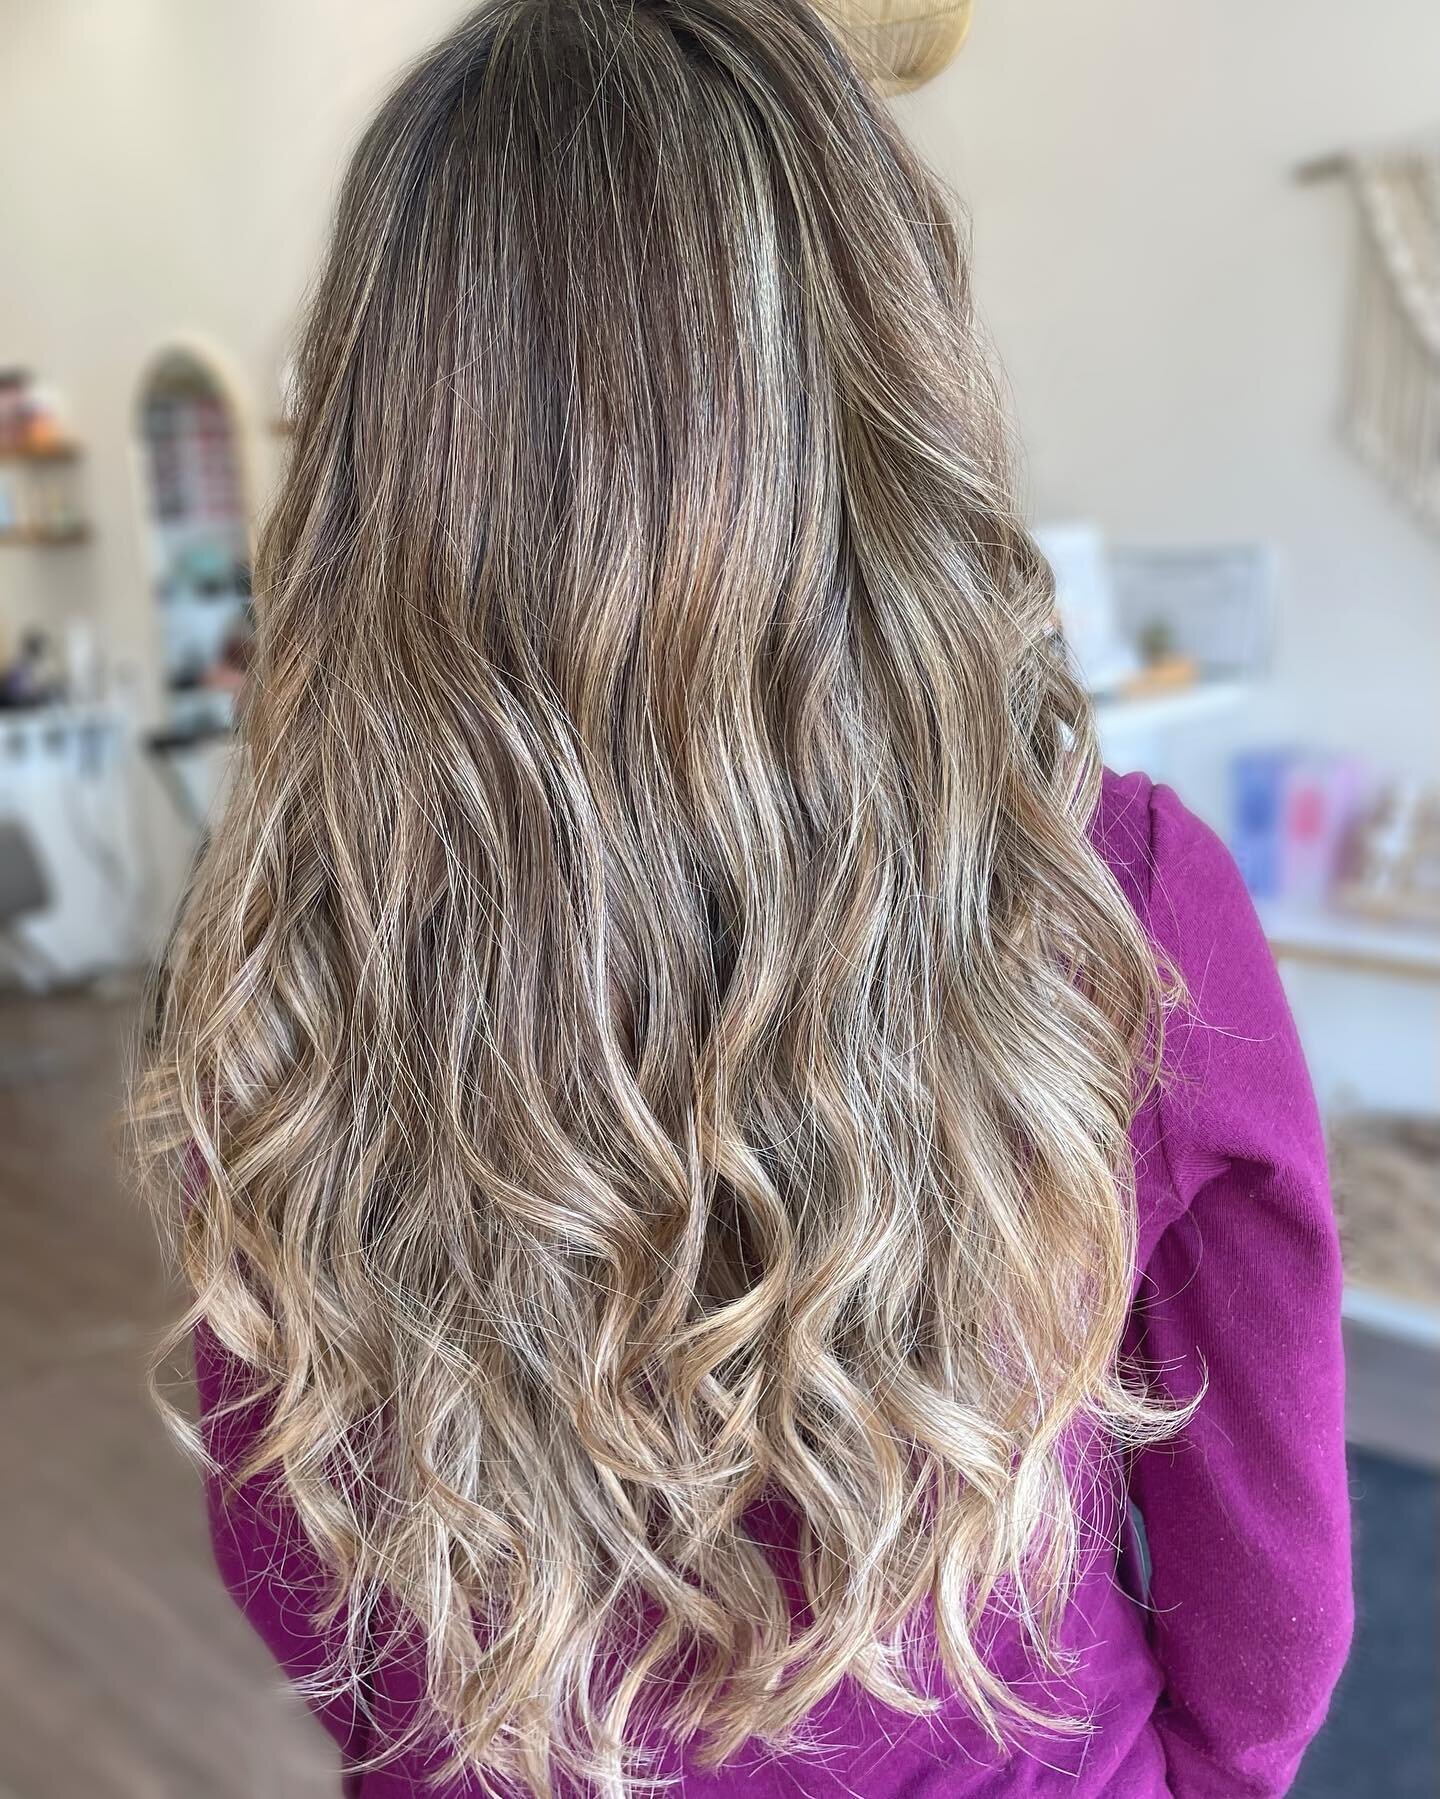 ::Ready for Spring::

Beautiful Traditional Highlights by @divine.hair.artistry 

Dm @divine.hair.artistry to book your next appointment 
.
.
.
.
.
.
.
.
#oakvillesalon #oakvillehairstylist #oakvillehair #oligopro #designmehair #kerrvillage #supoorts